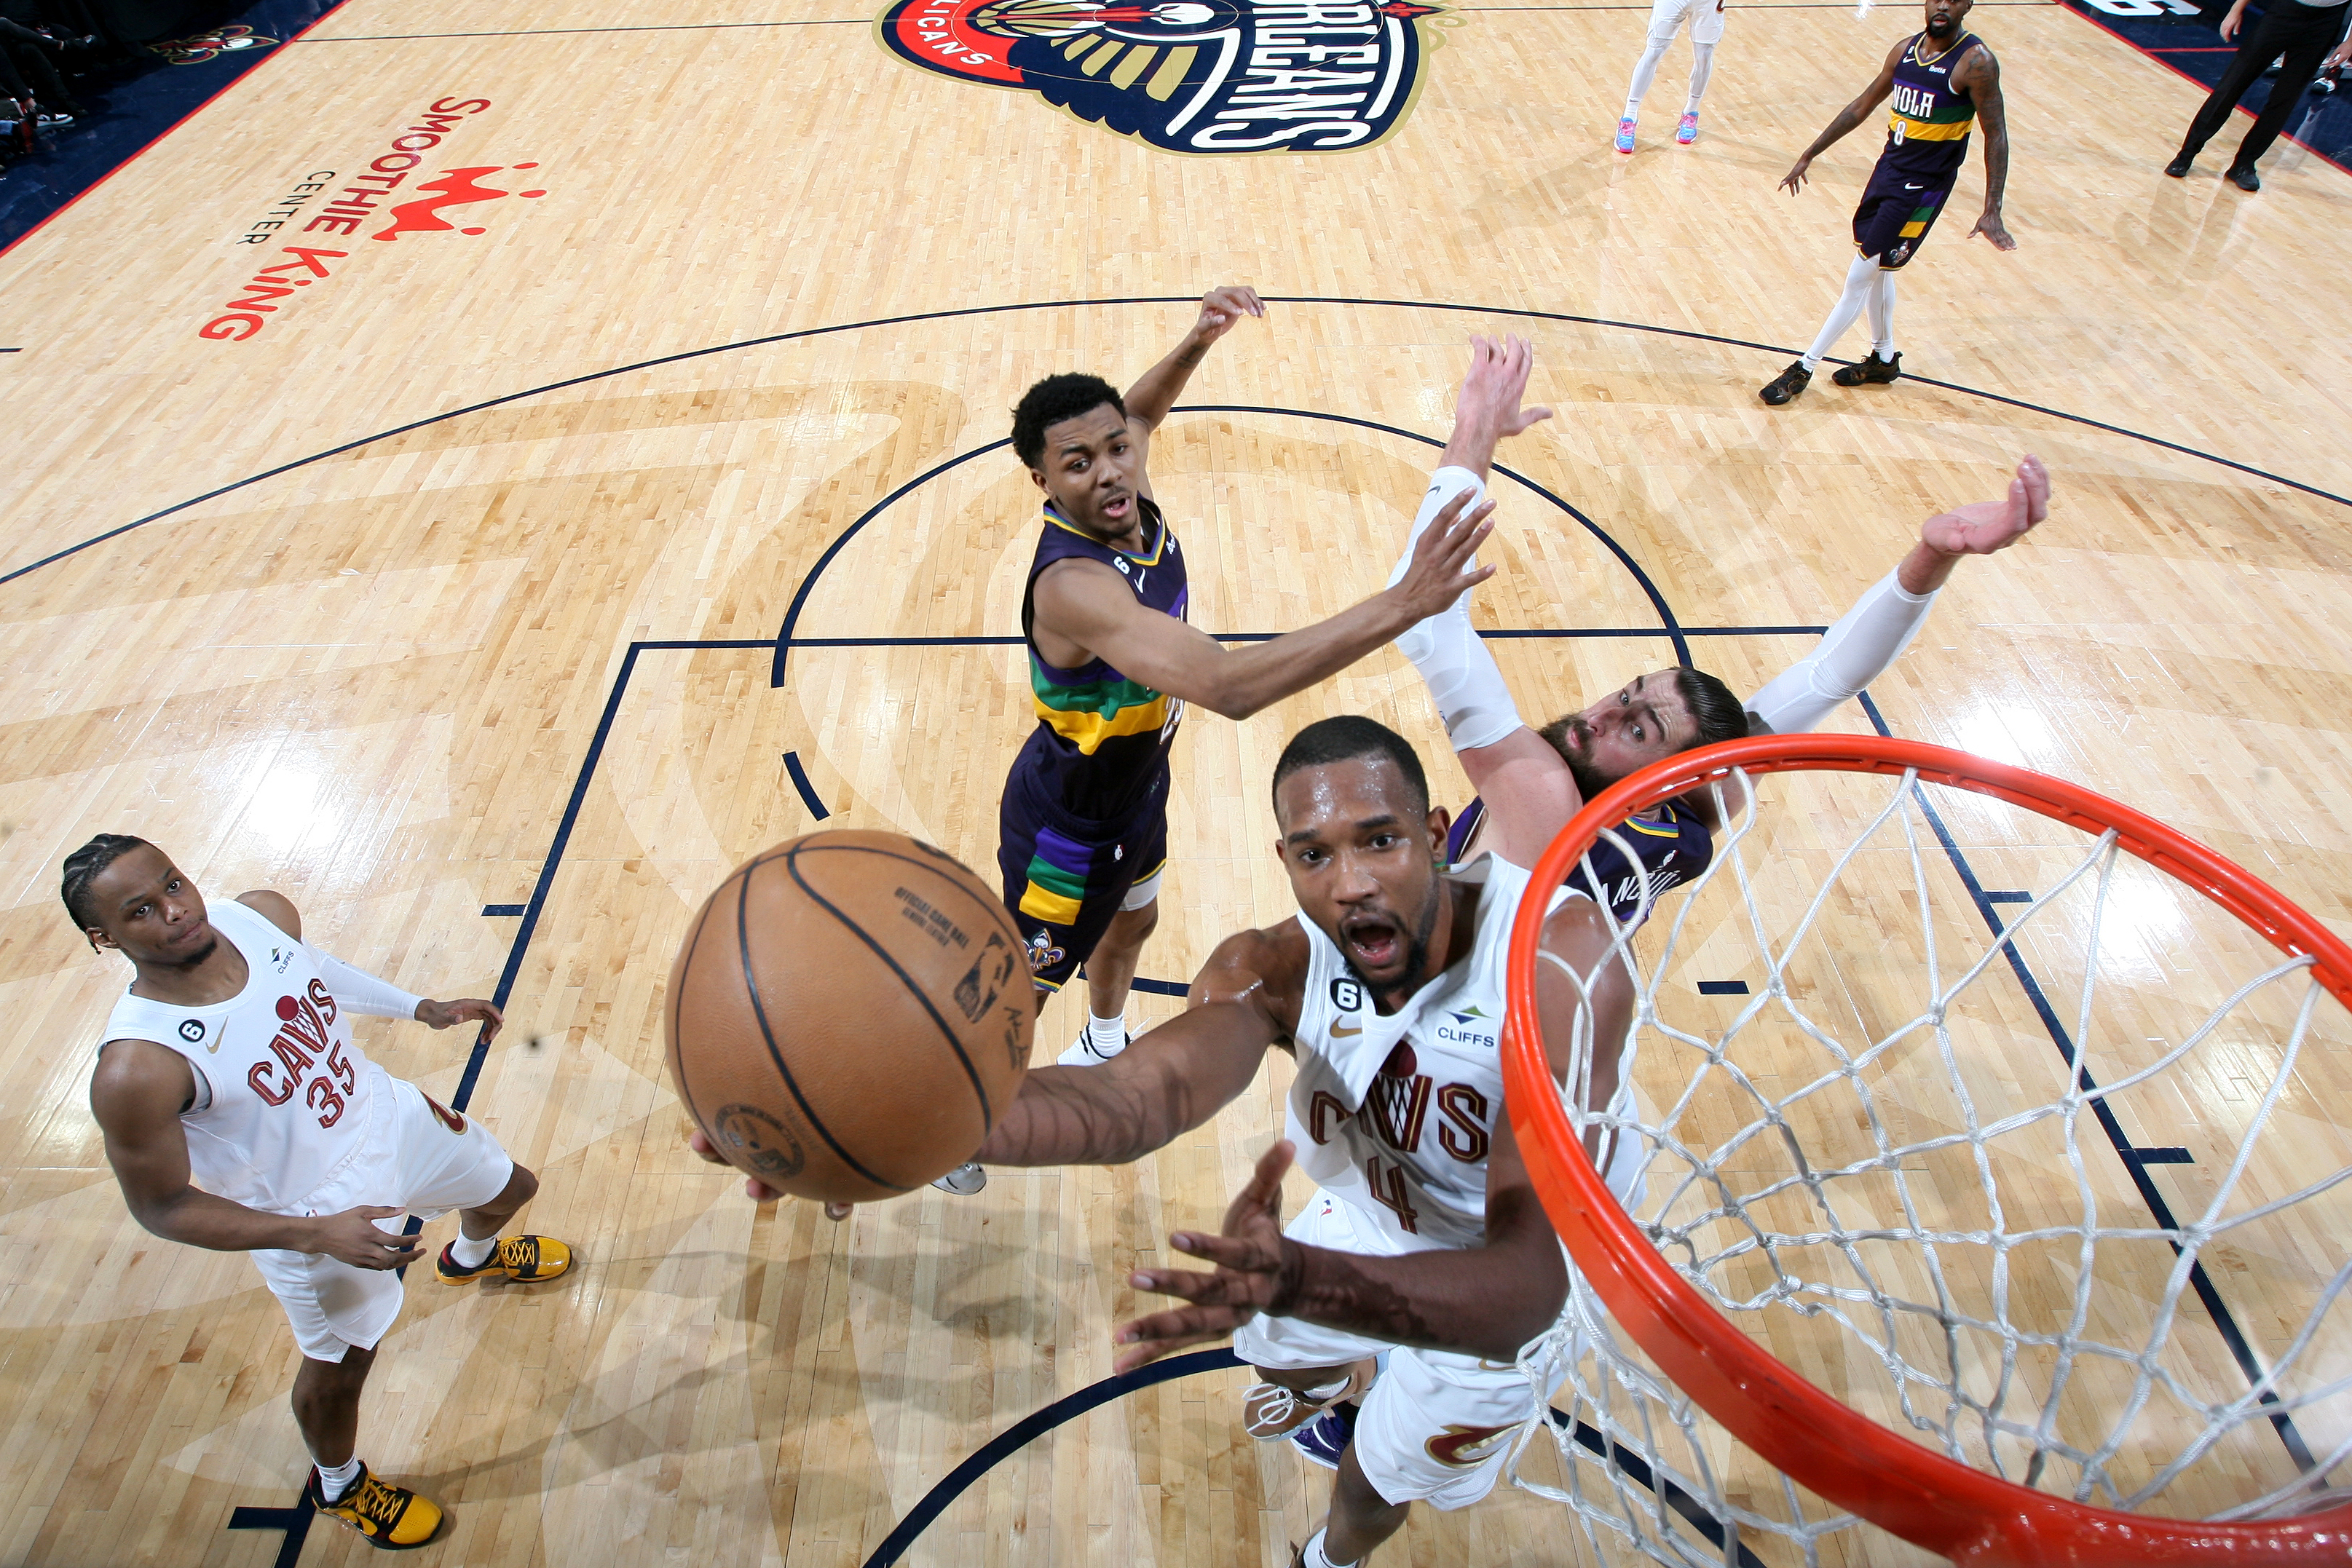 Cleveland Cavaliers v New Orleans Pelicans